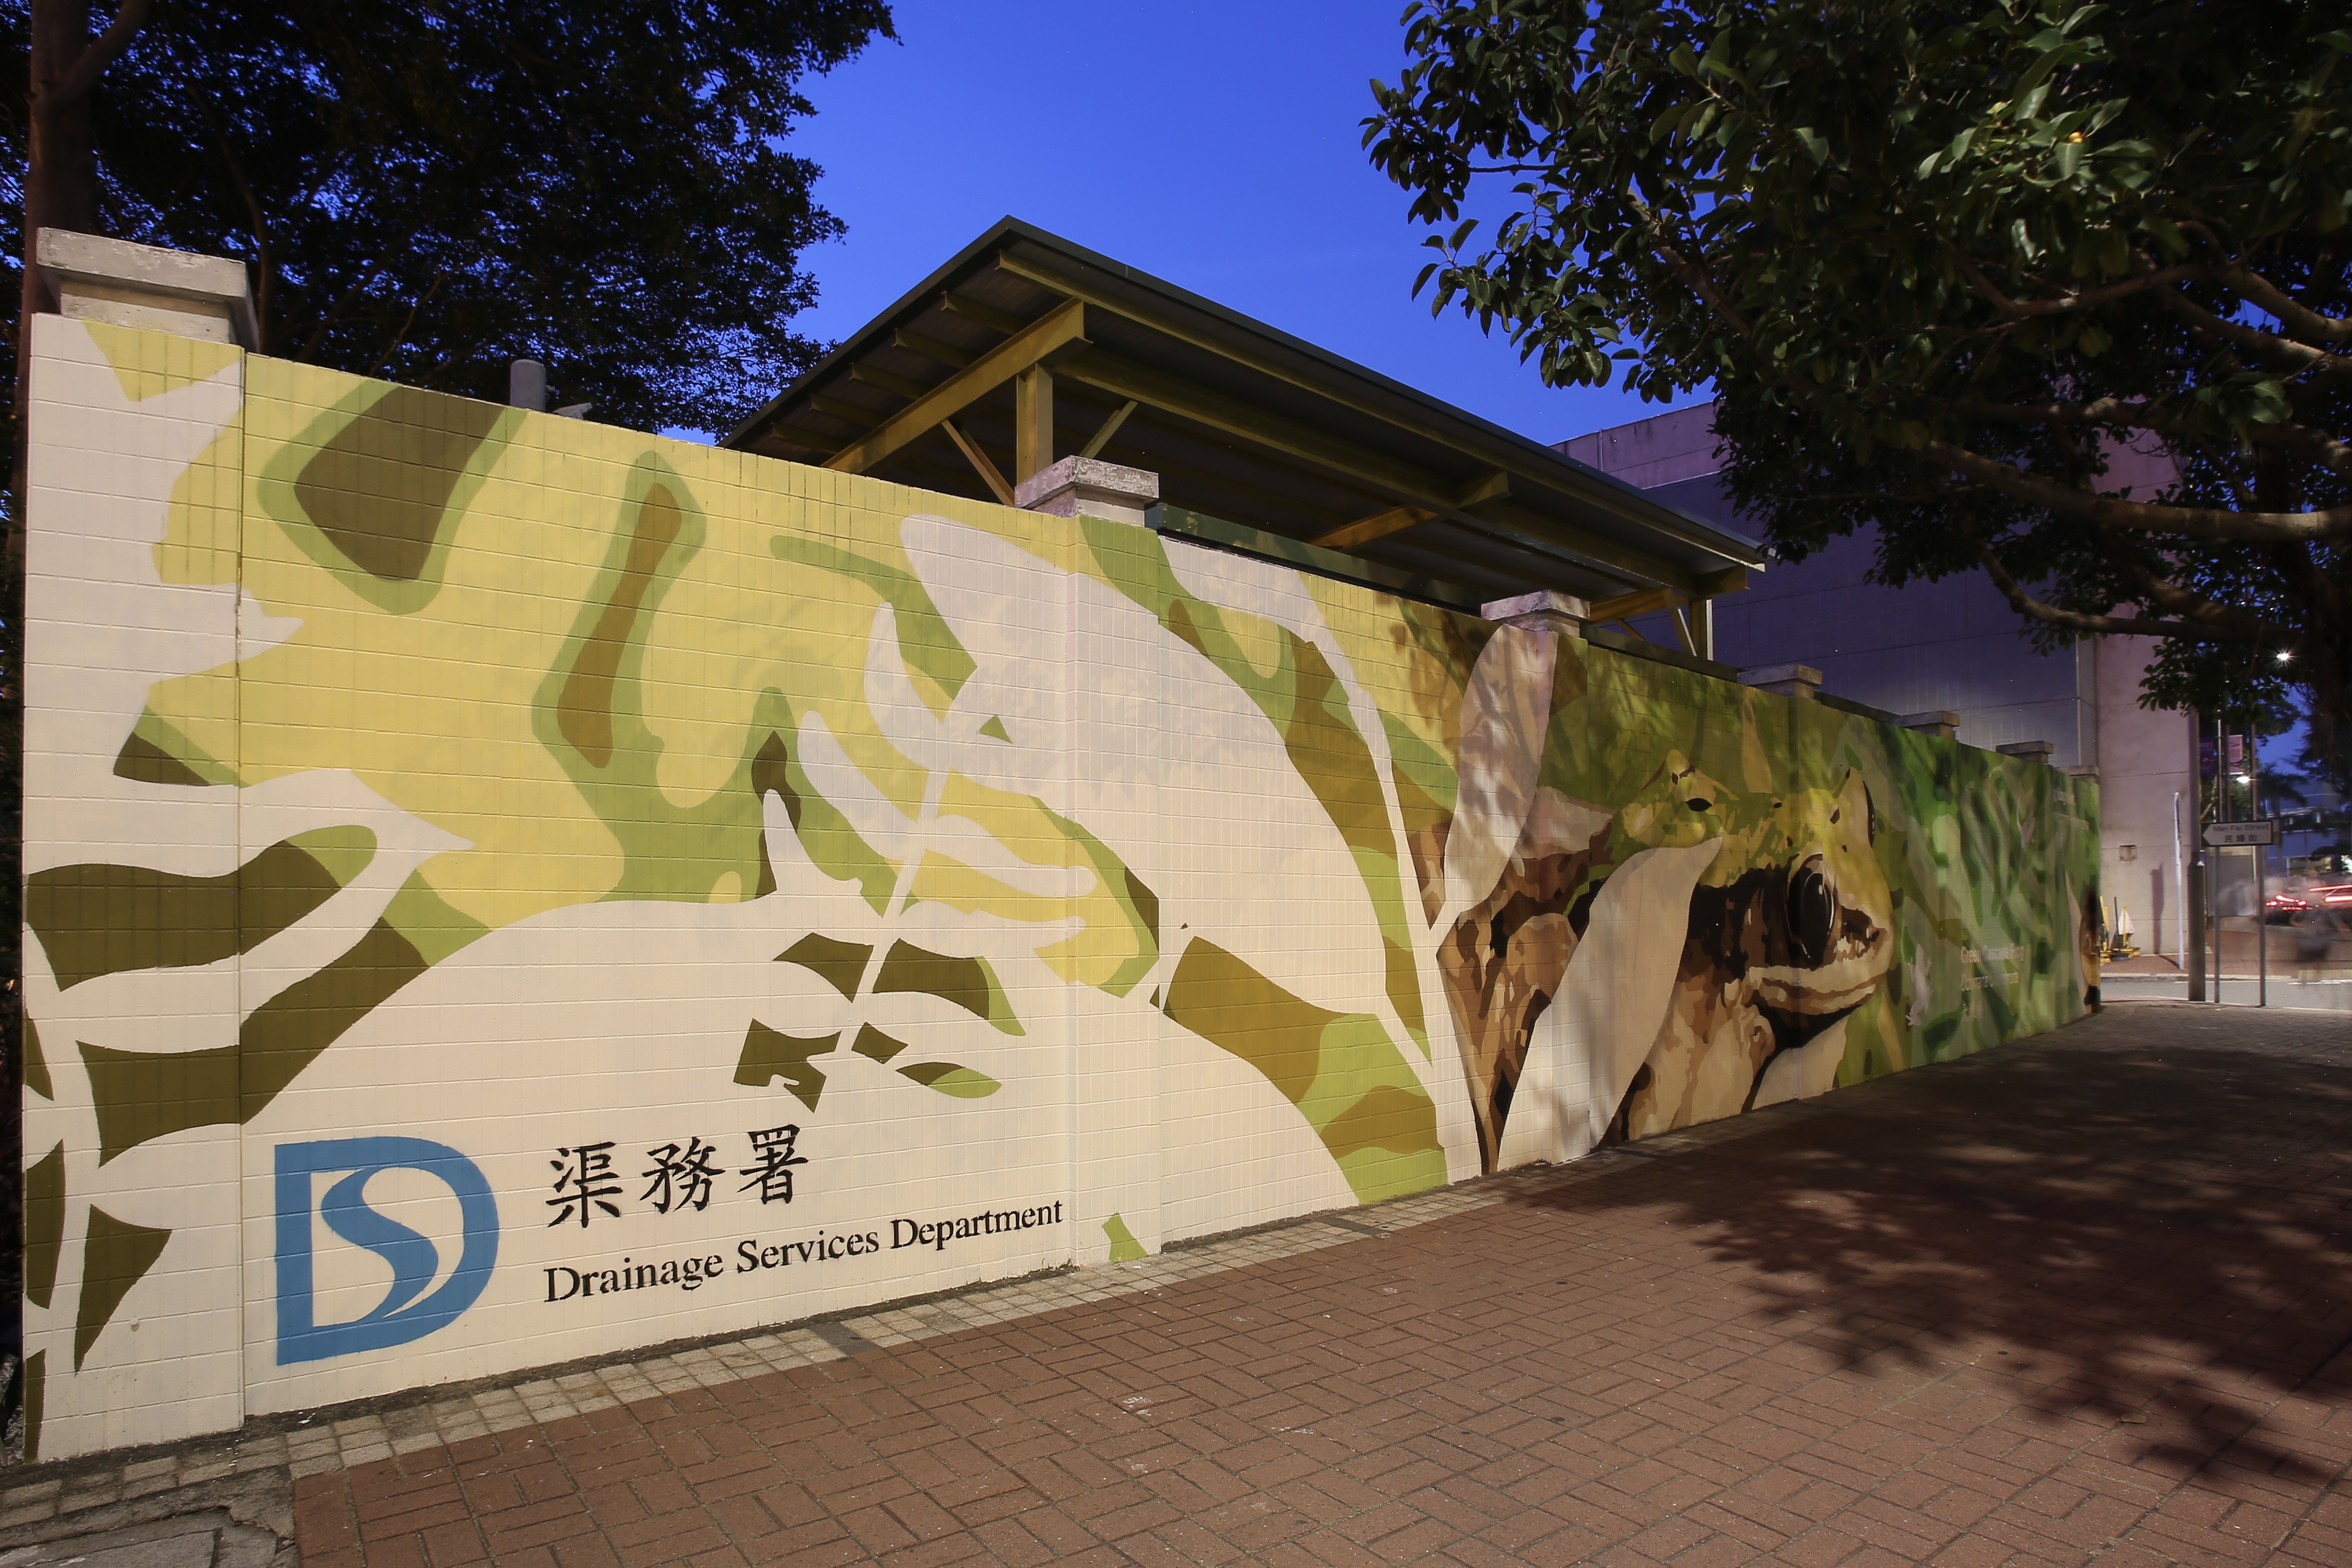 Mural paintings in Central